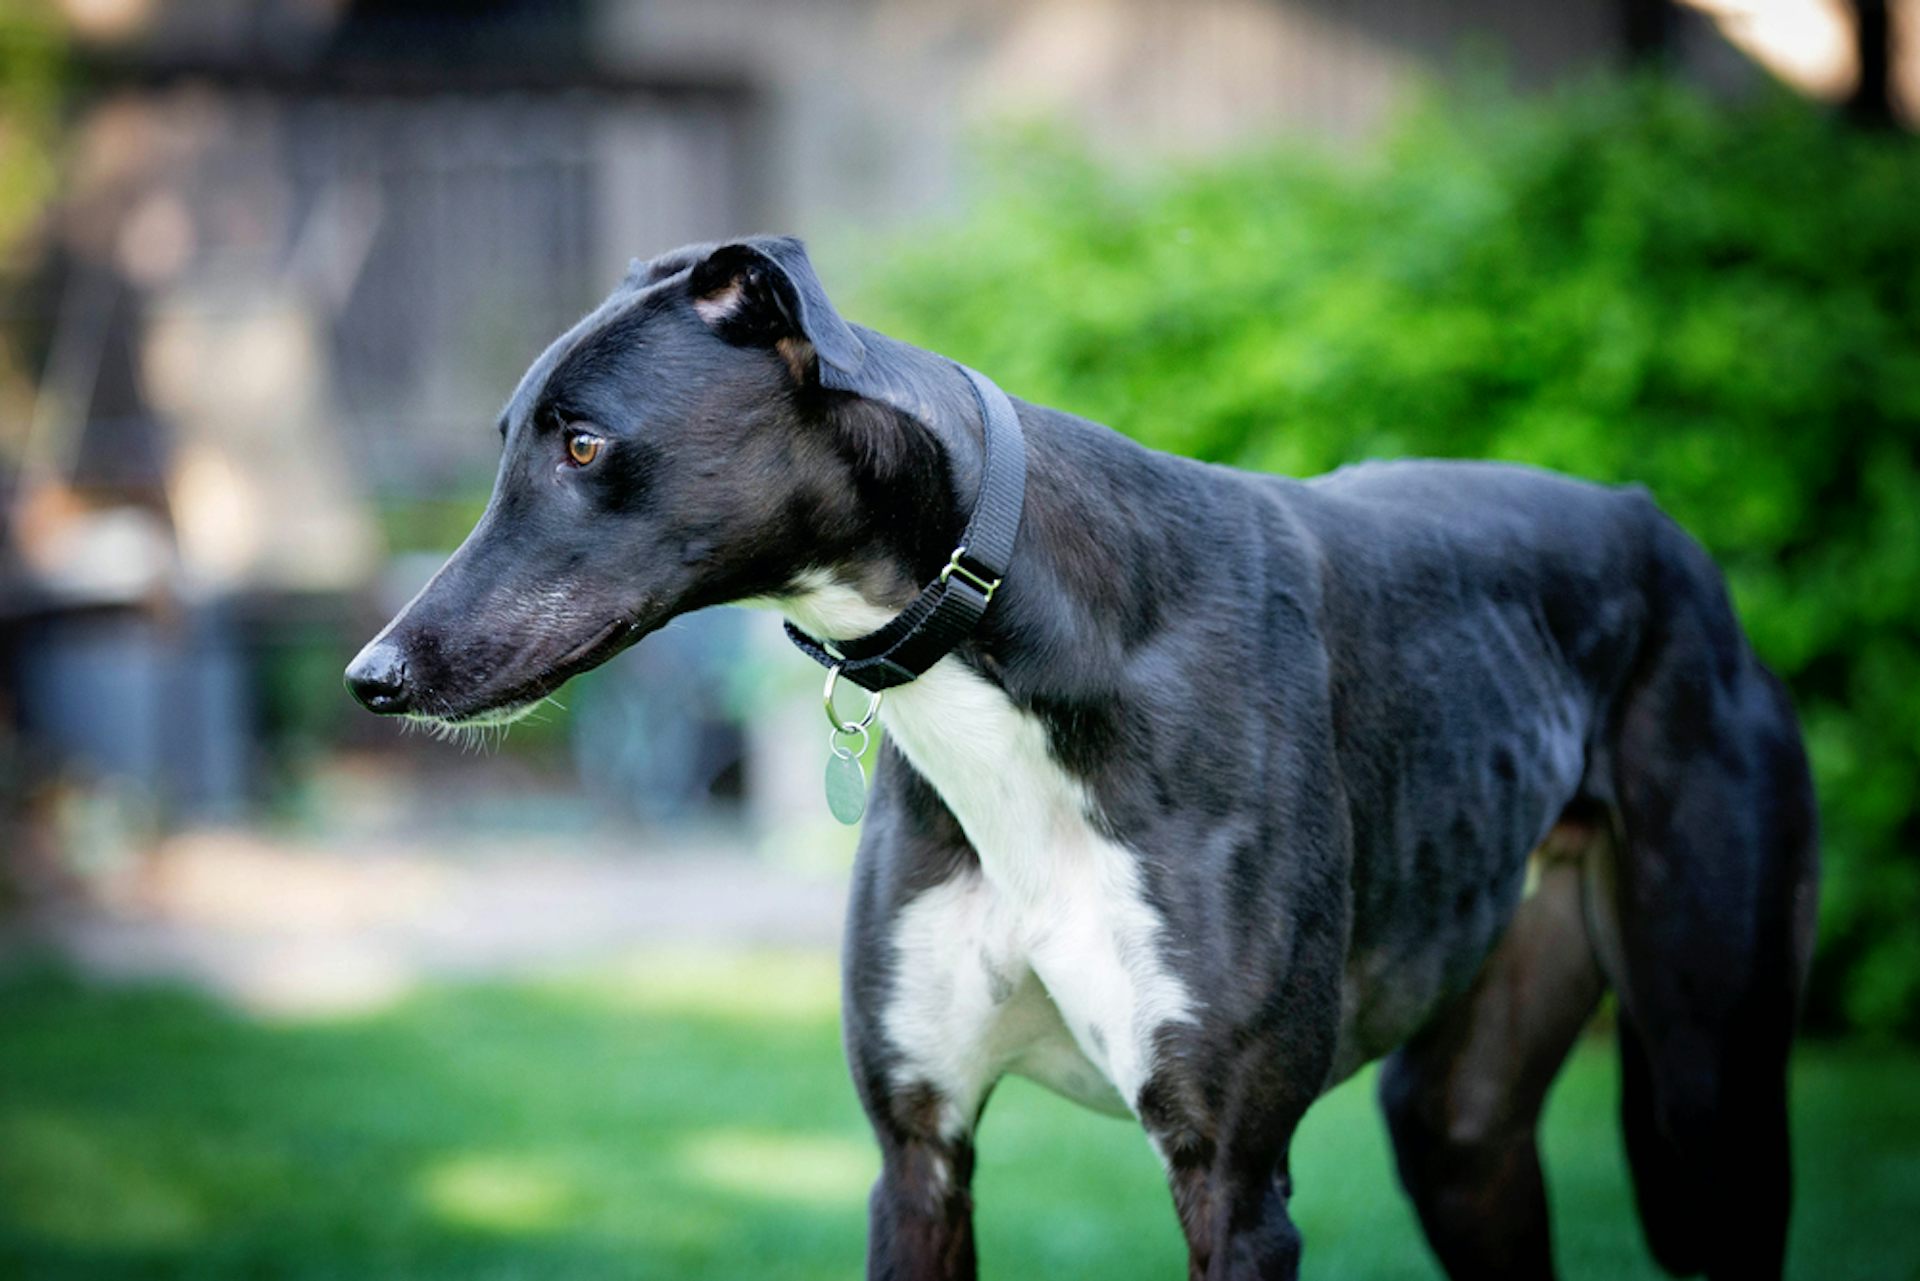 dogs that look like greyhounds